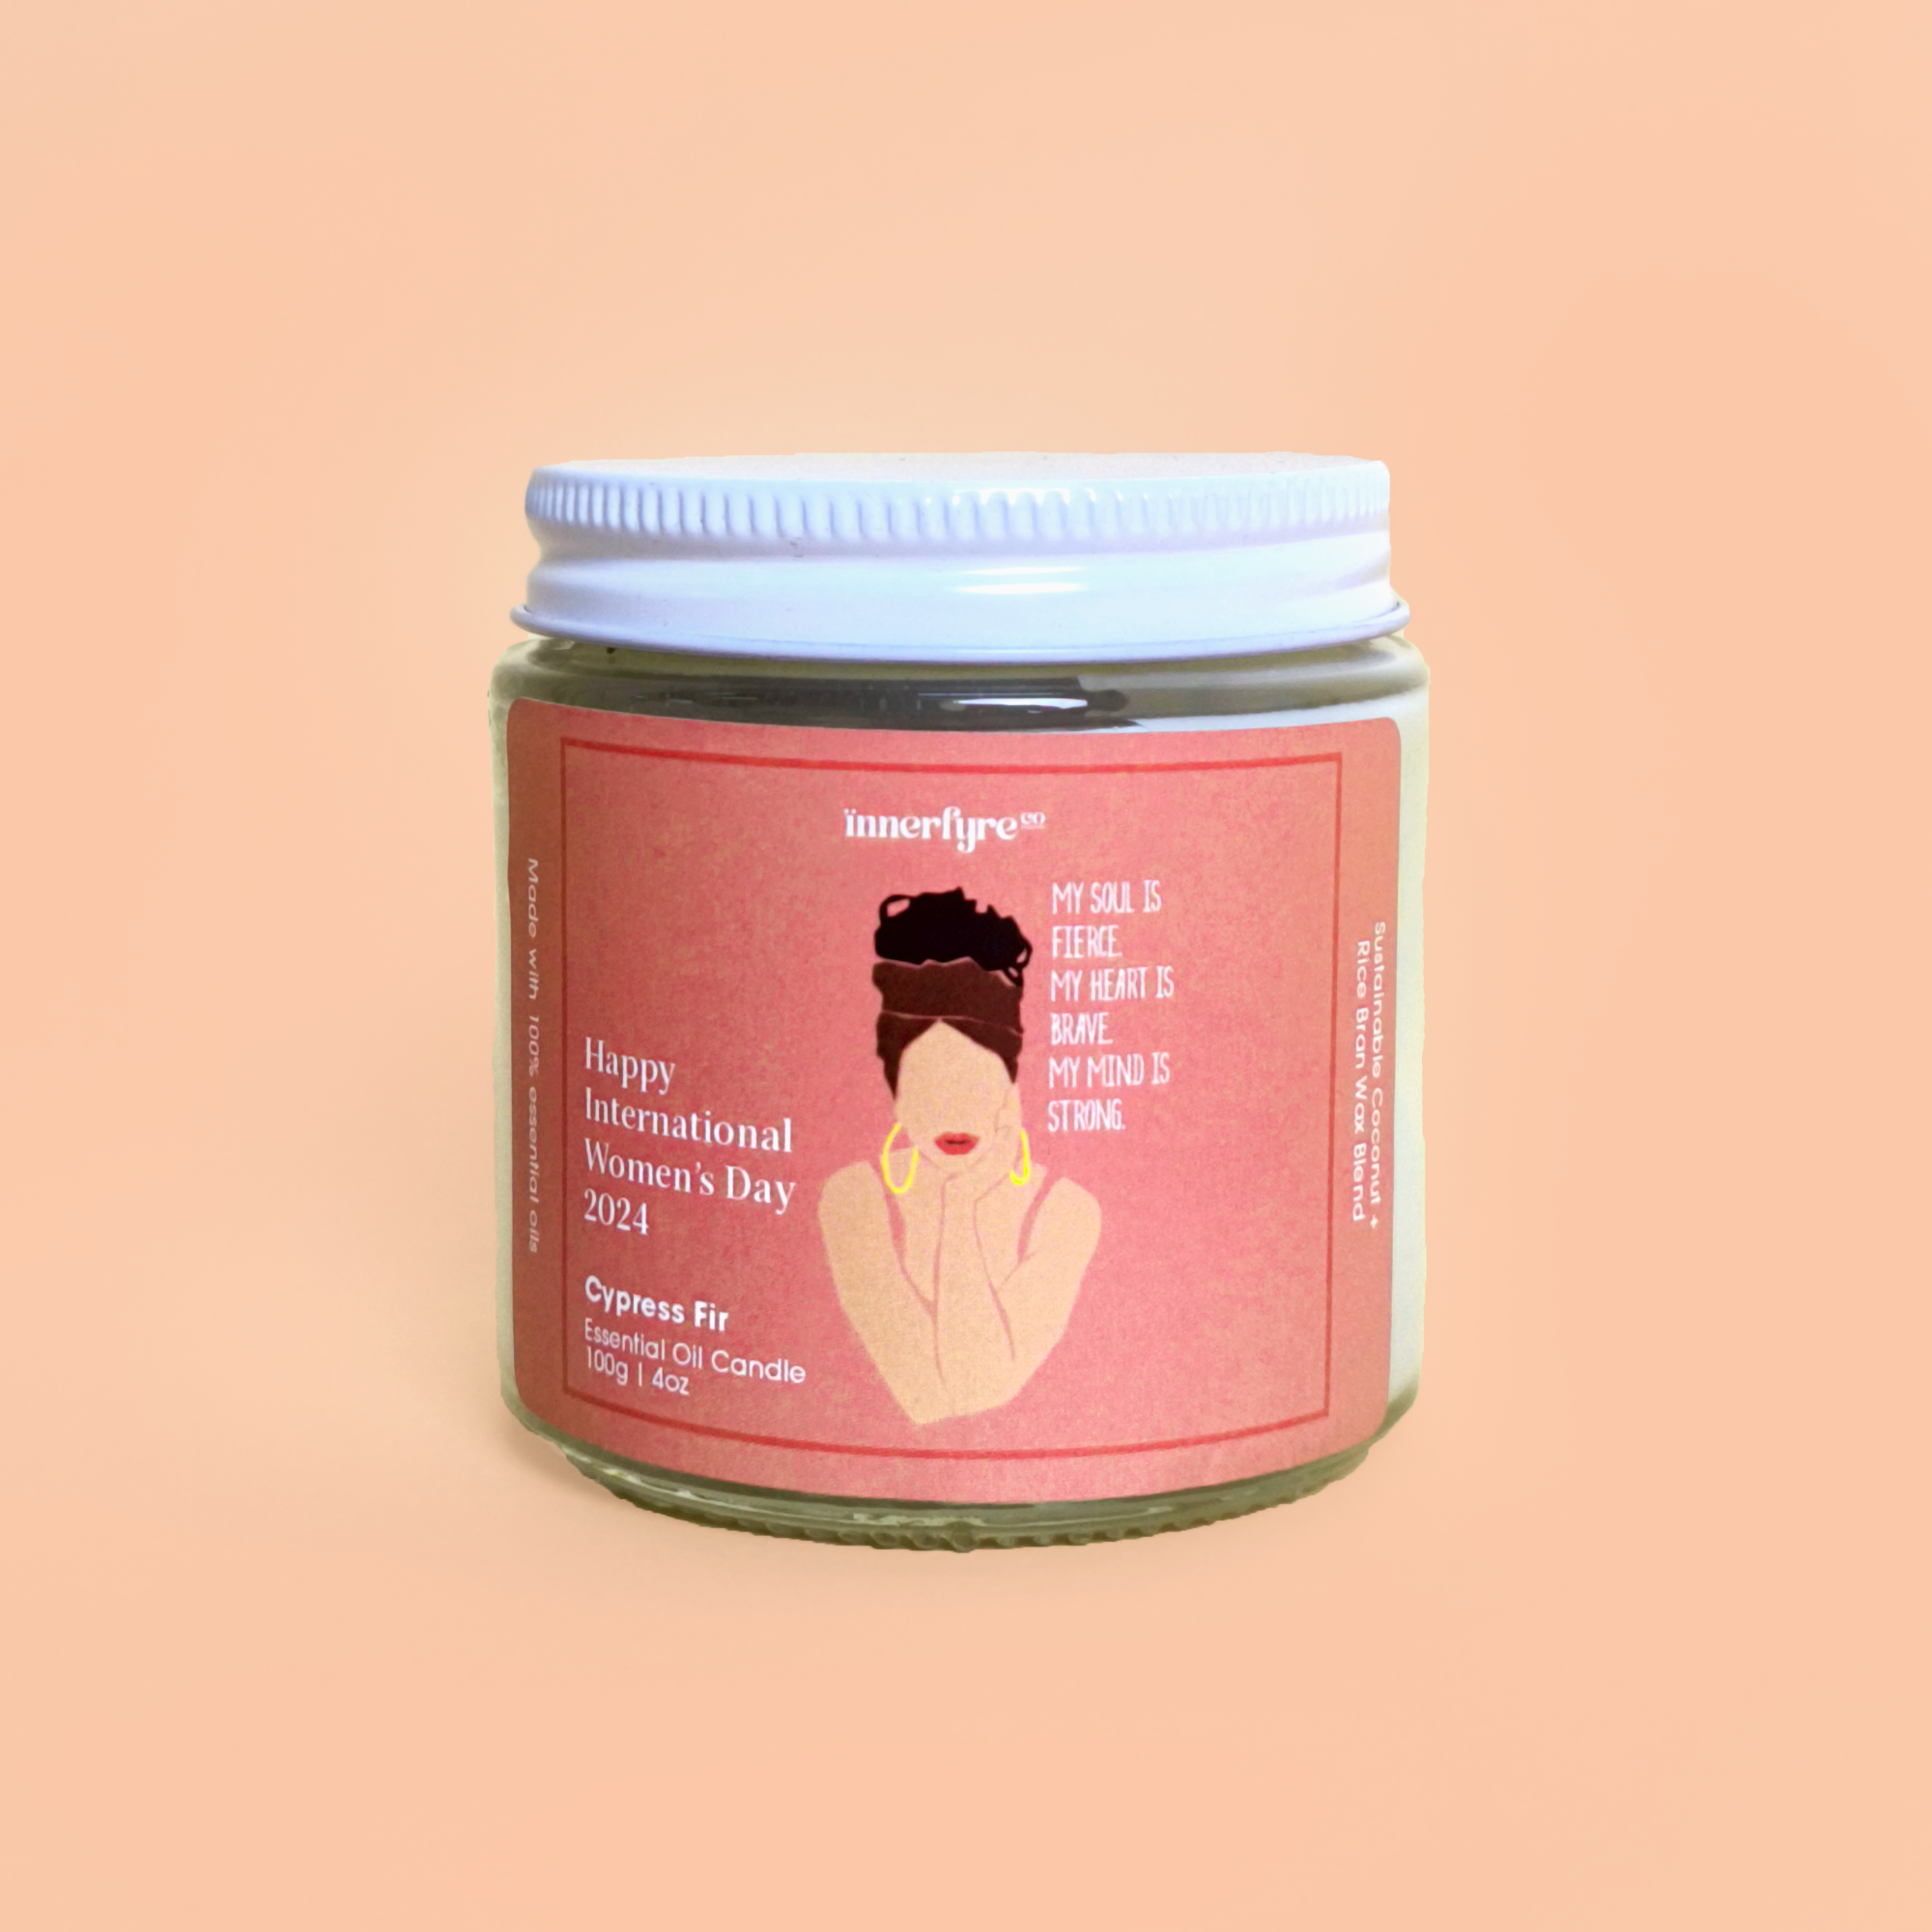 International Women’s Day Cypress Fir Candle by Innerfyre | Home fragrances | The Green Collective SG